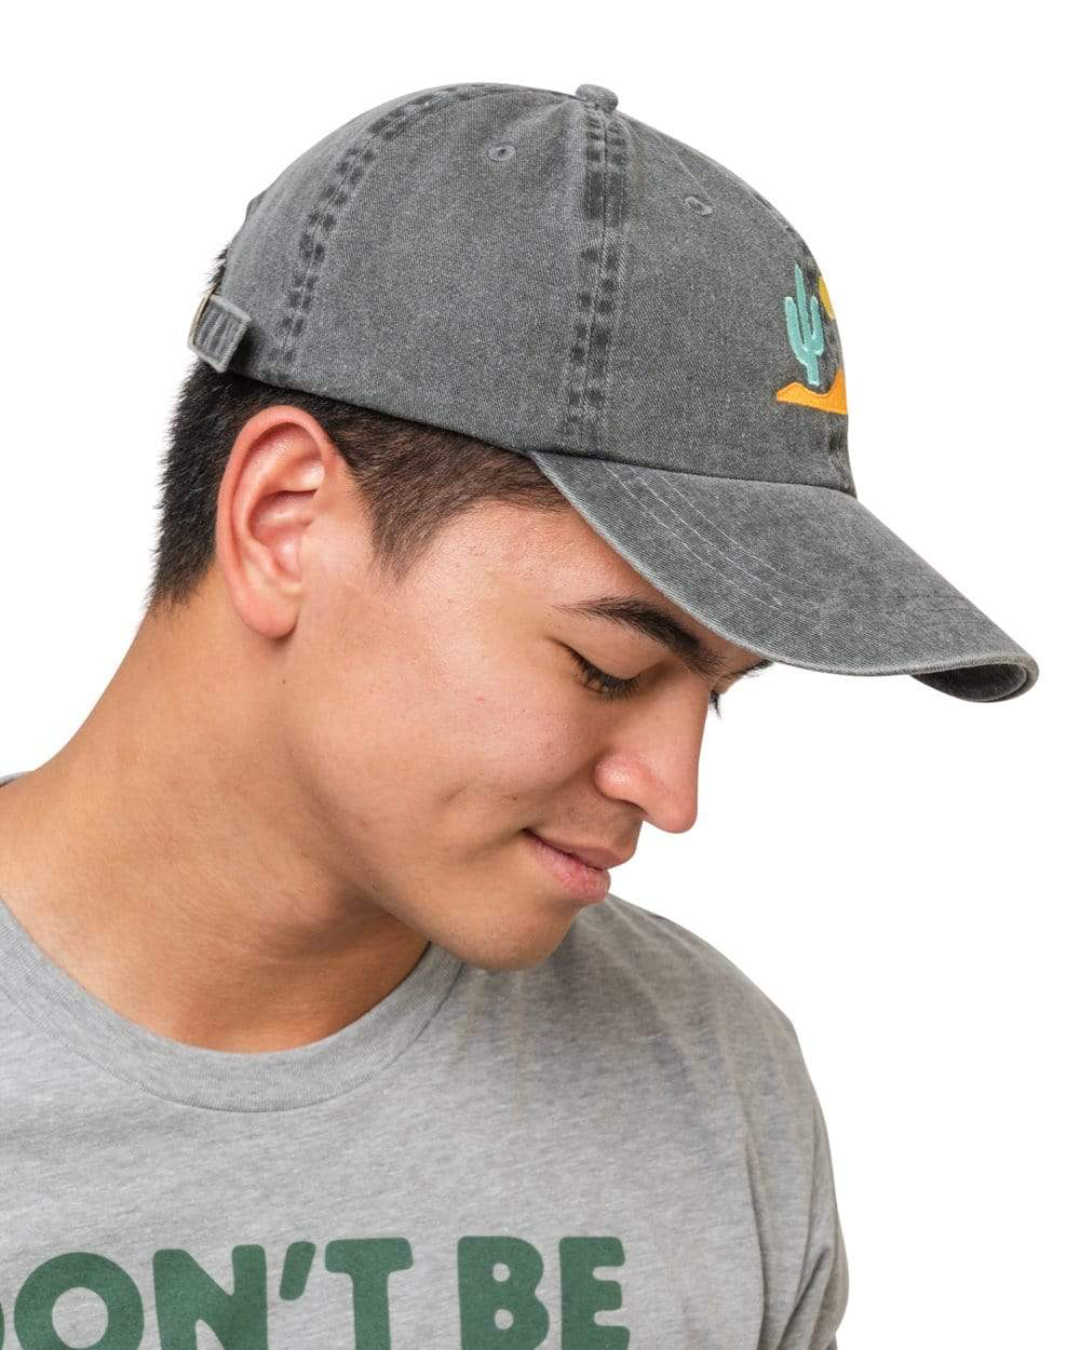 Keep Nature Wild Lone Cactus Dad Hat - Faded Black